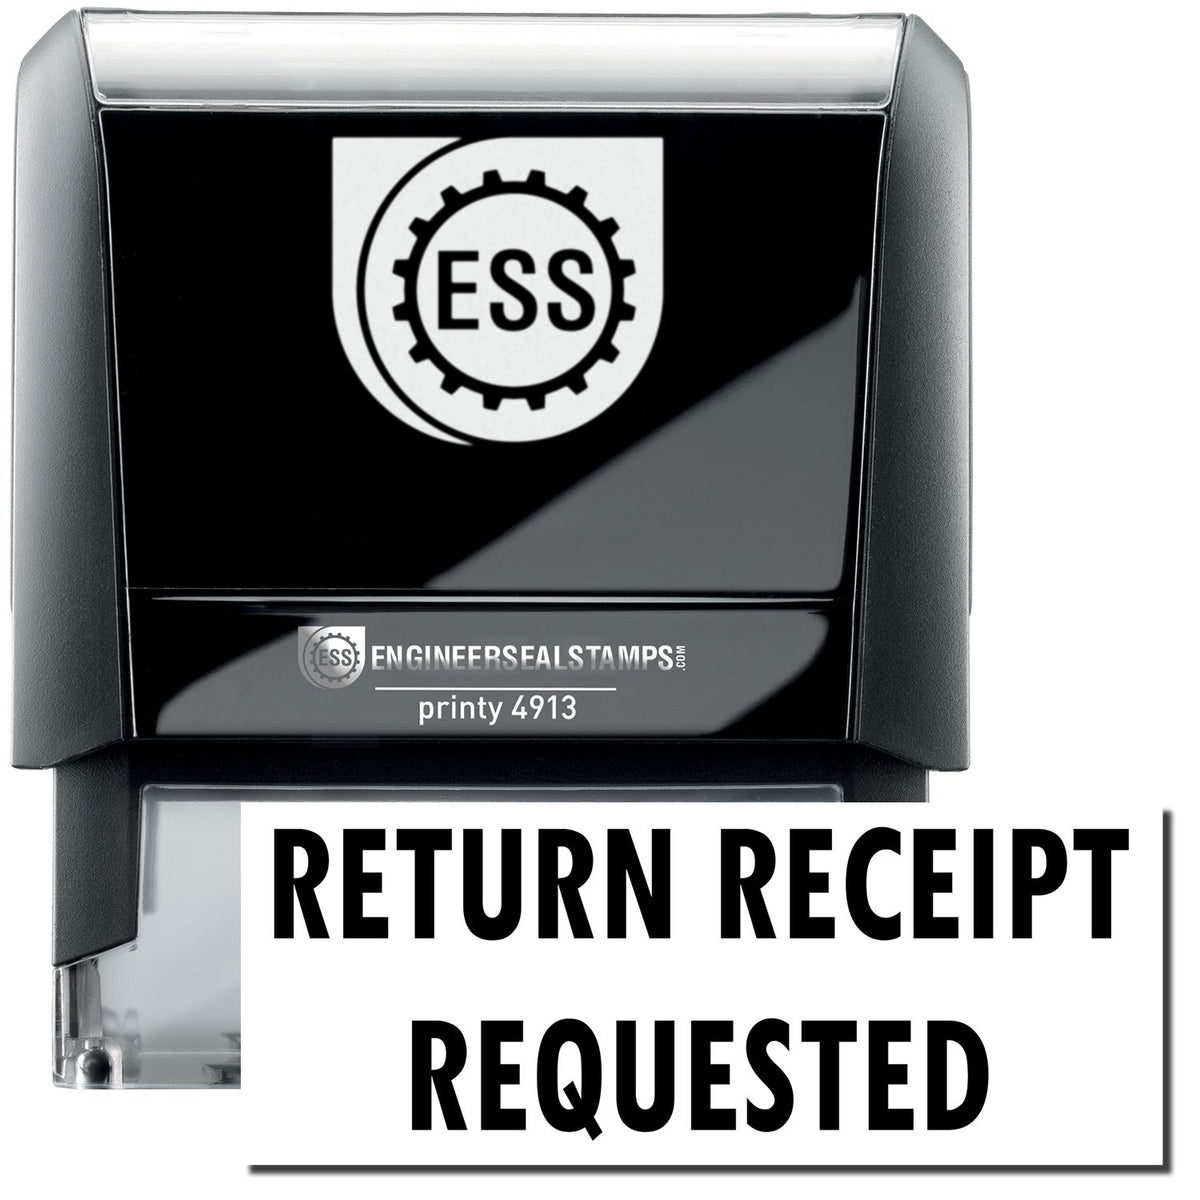 A self-inking stamp with a stamped image showing how the text &quot;RETURN RECEIPT REQUESTED&quot; in a large bold font is displayed by it.